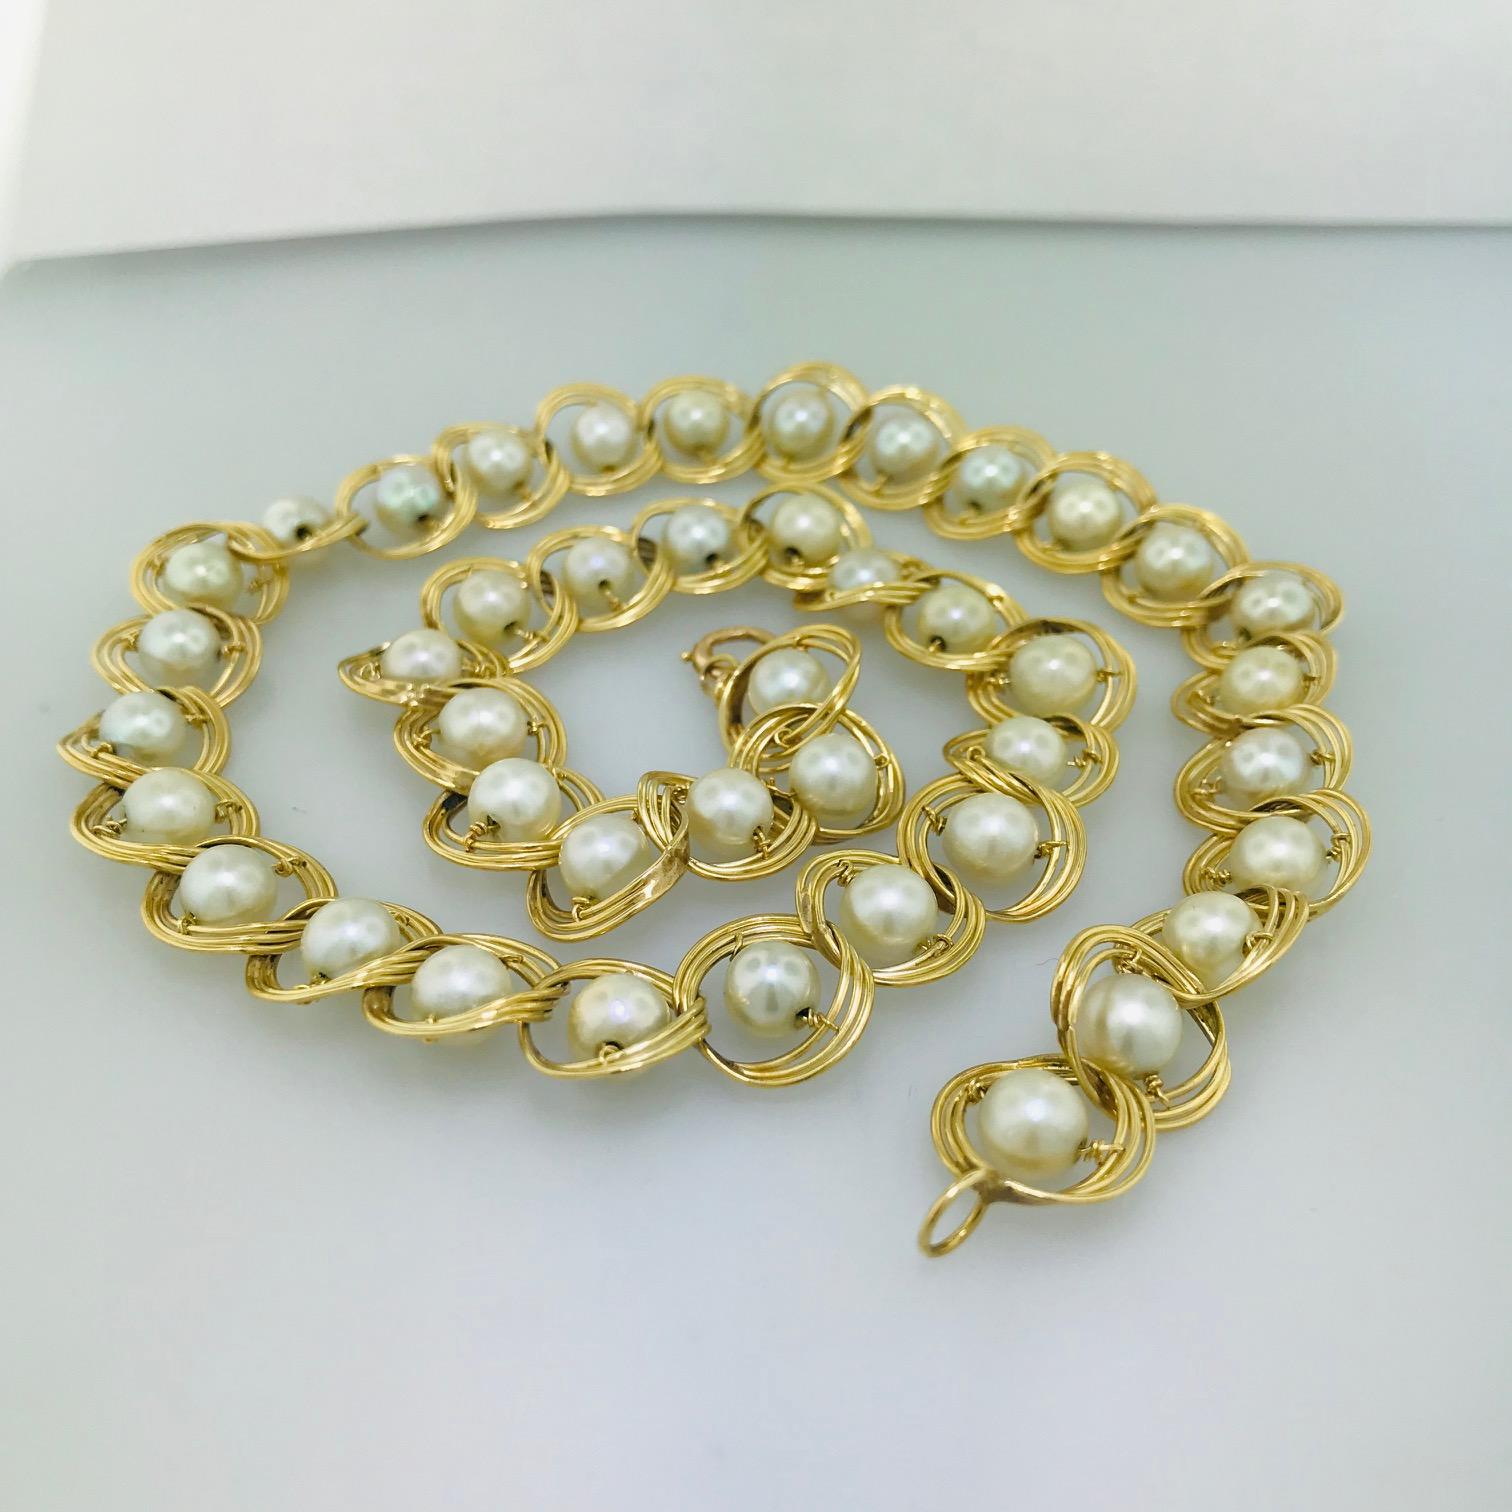 Every pearl in this necklace has been chosen directly from a live oyster in the seas of Japan and specifically for this design. They each have a beautiful luster and have been hand picked from millions of Akoya saltwater pearls and matched for this